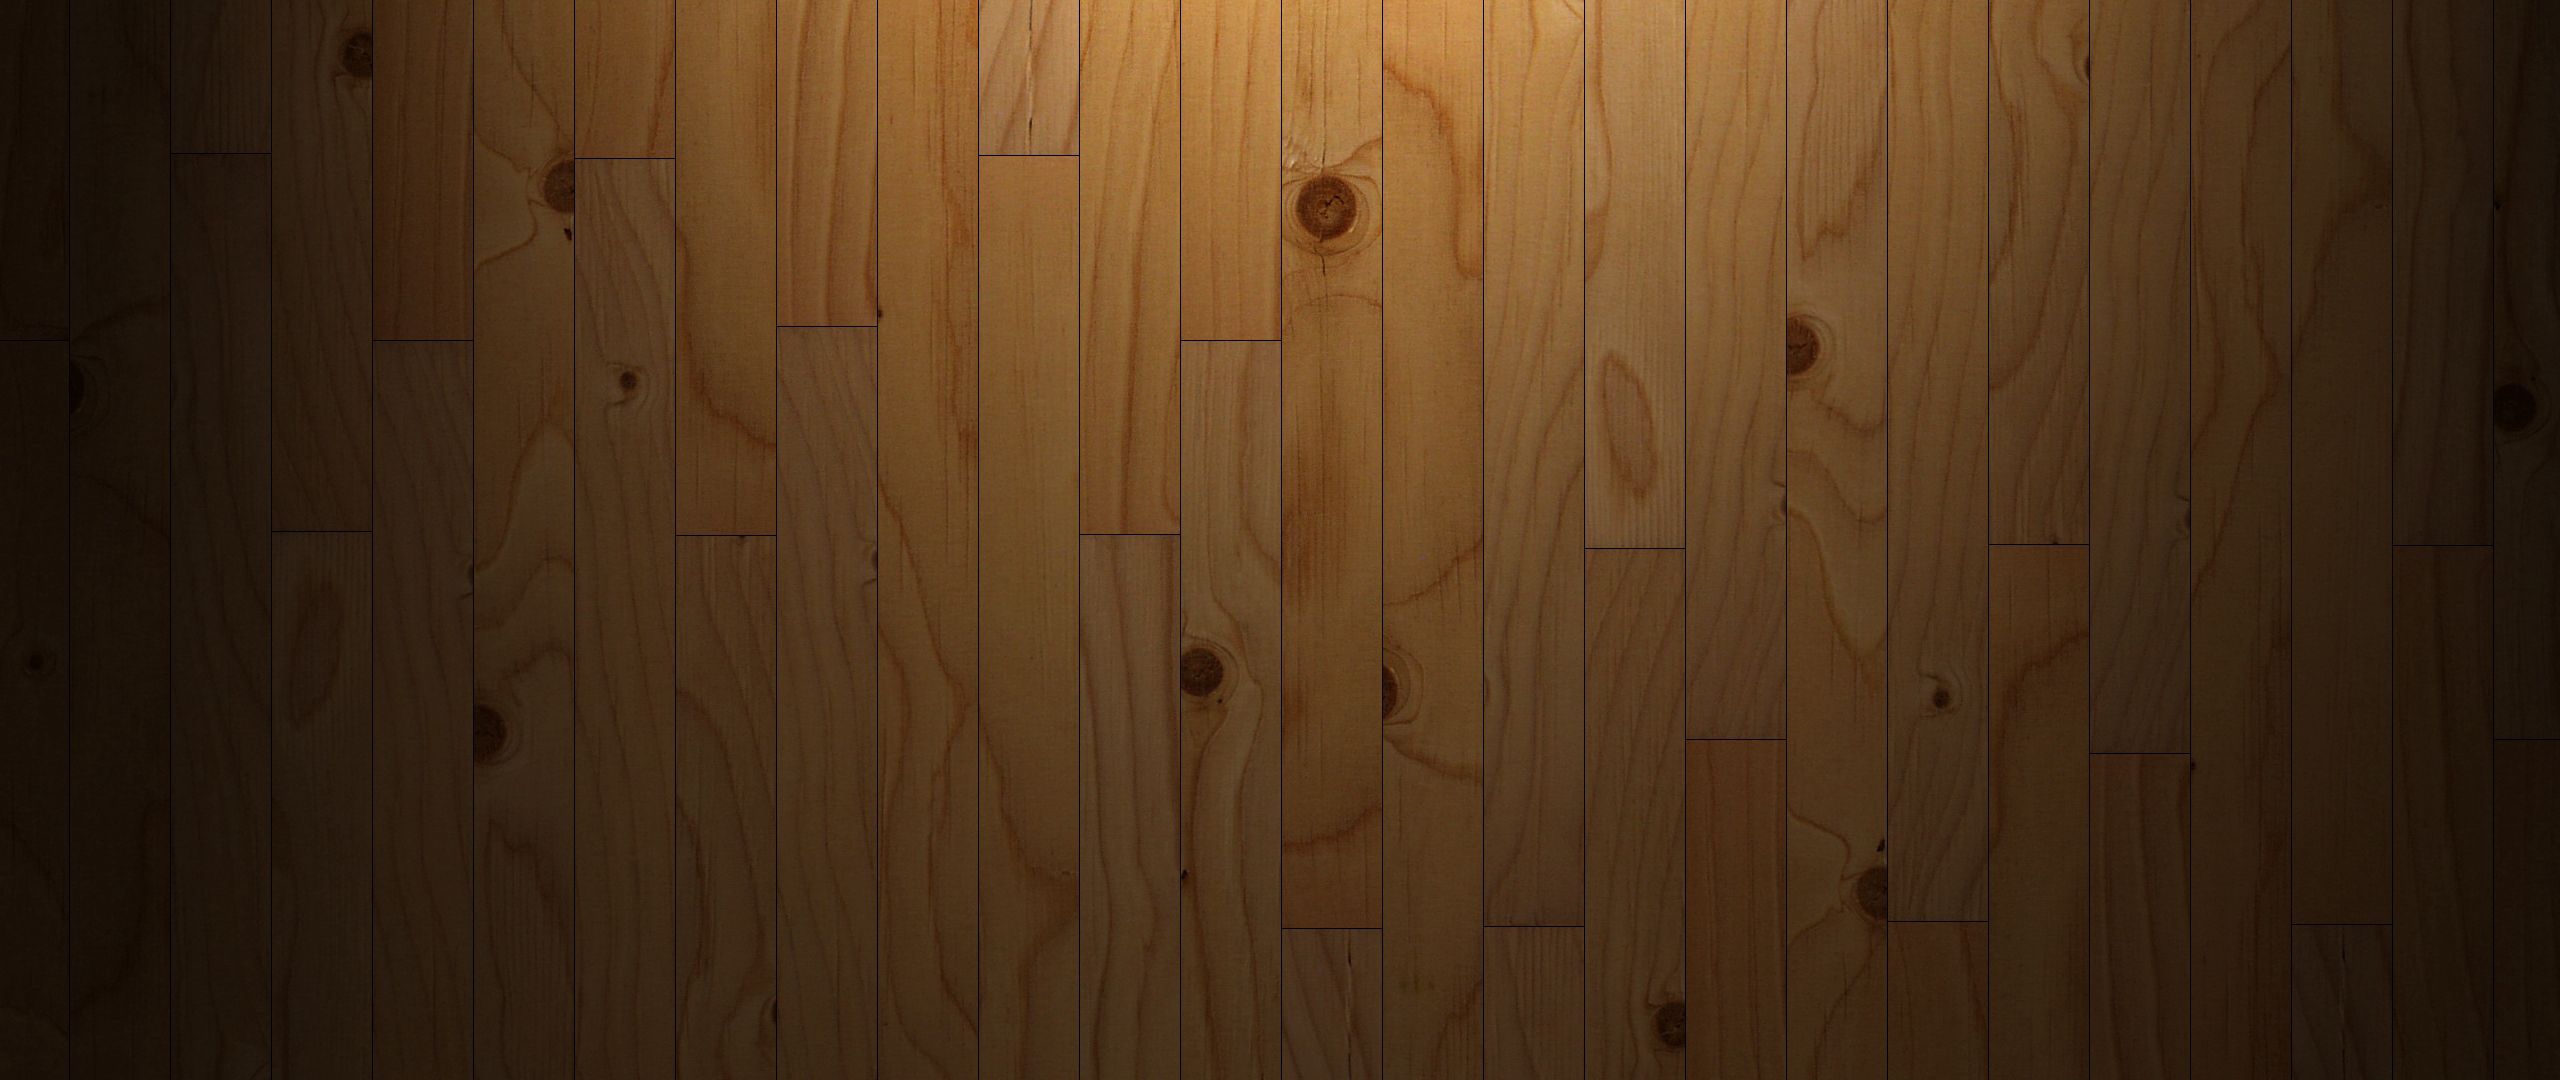 Download wallpaper 2560x1080 parquet, boards, wood, texture, stripes dual wide 1080p HD background